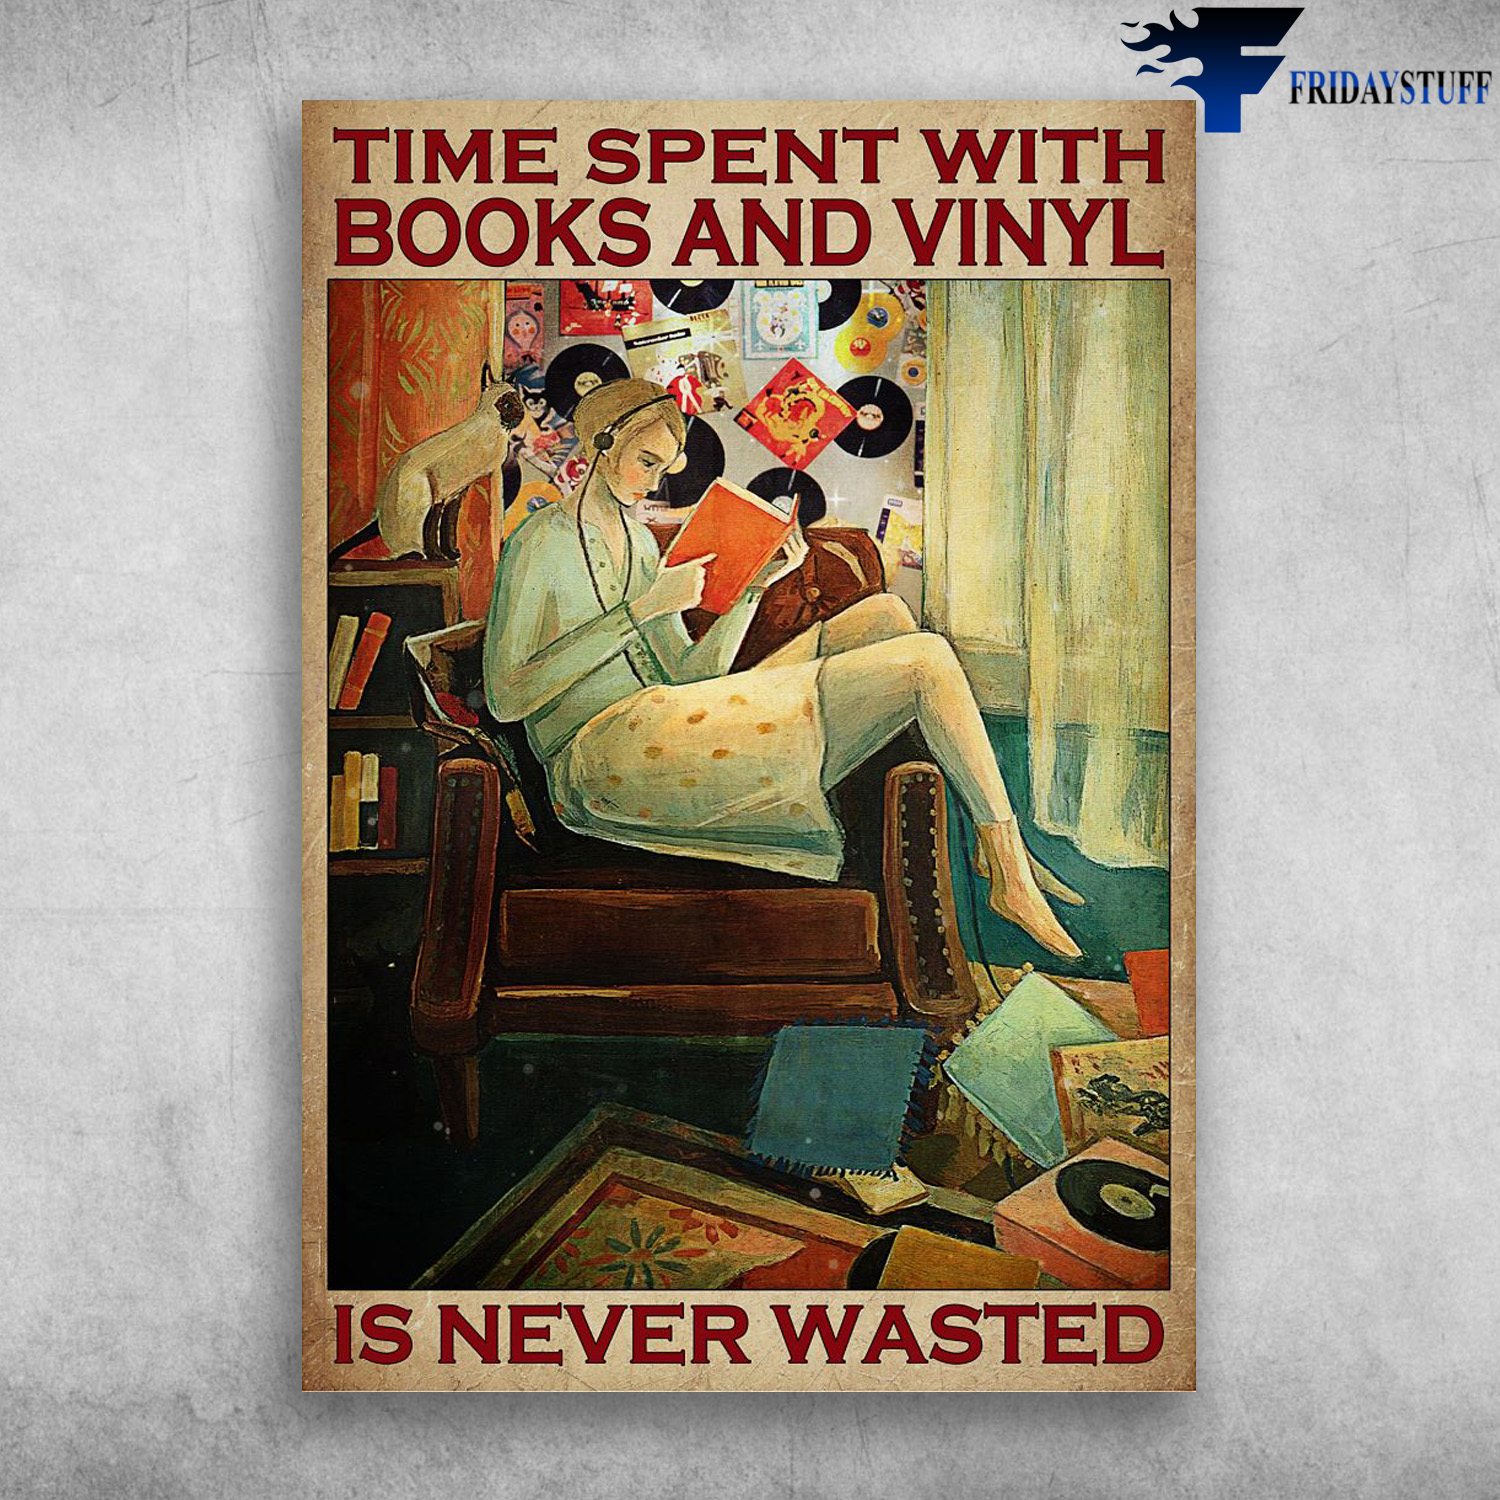 Girl Loves Book And Vinyl - Time Spent With Books And Wine, Is Never Wasted